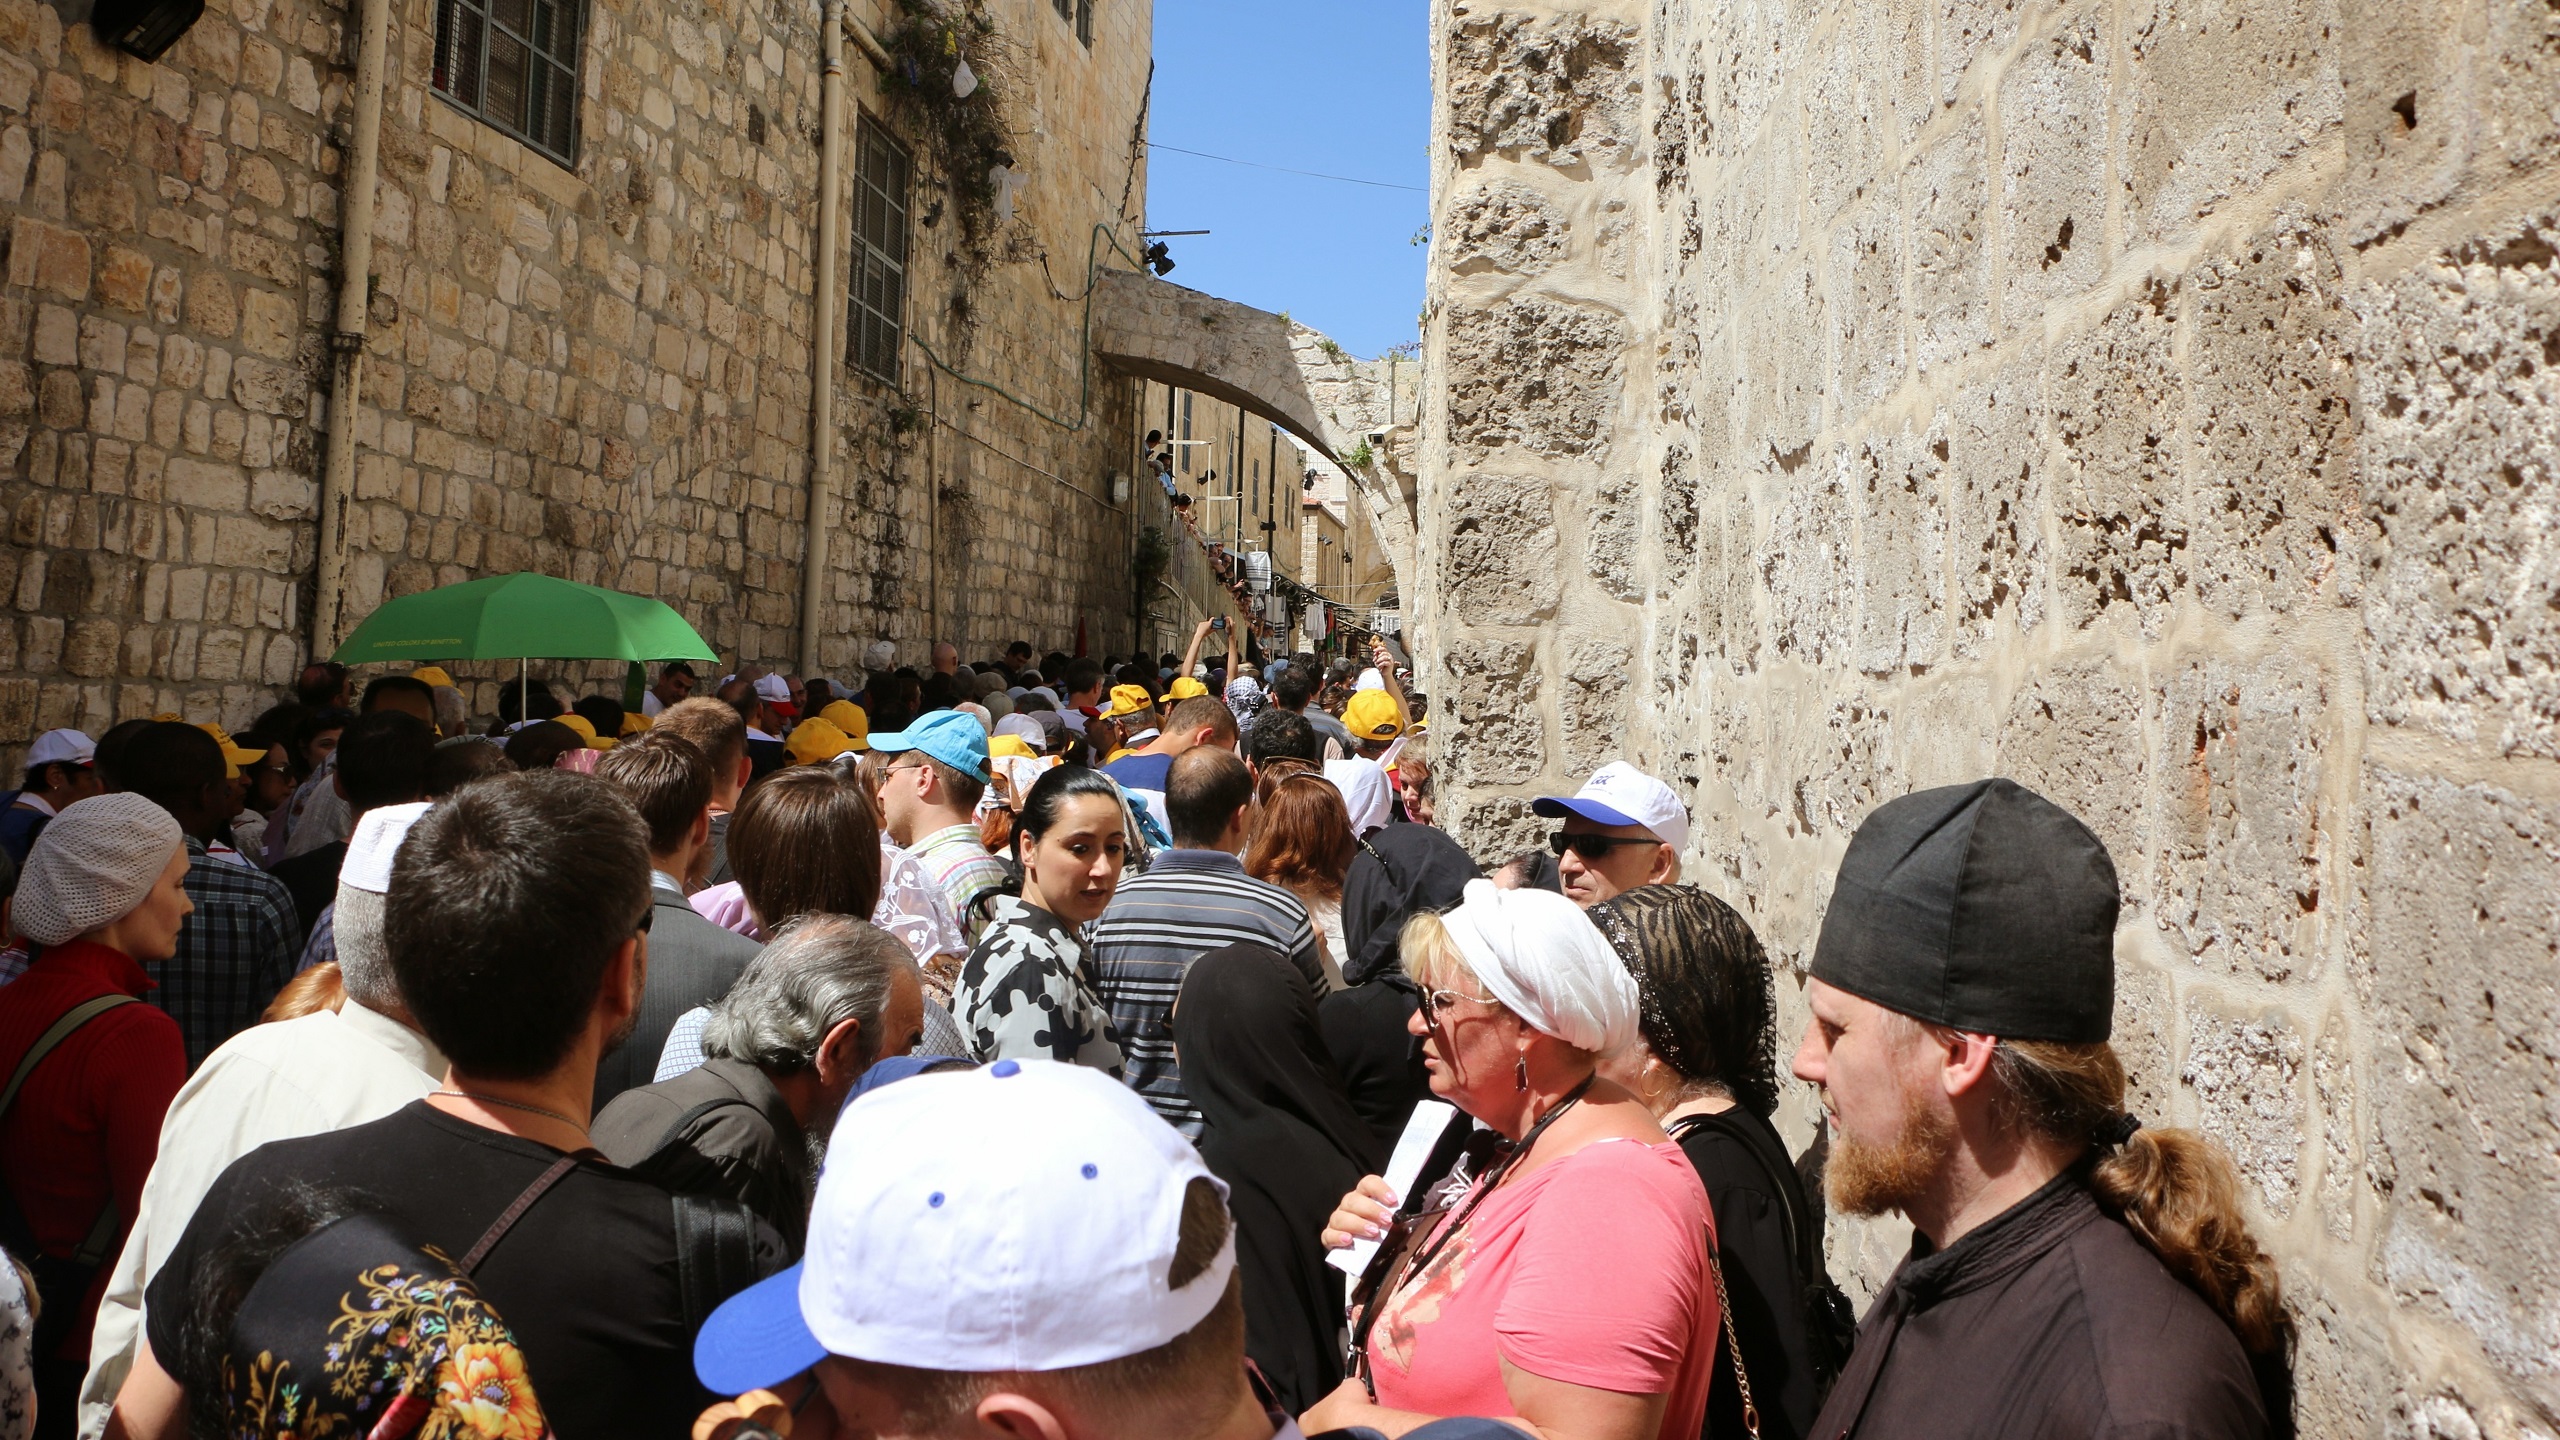 Tension Looms Over Jerusalem on Easter Sunday Amid Ongoing Violence